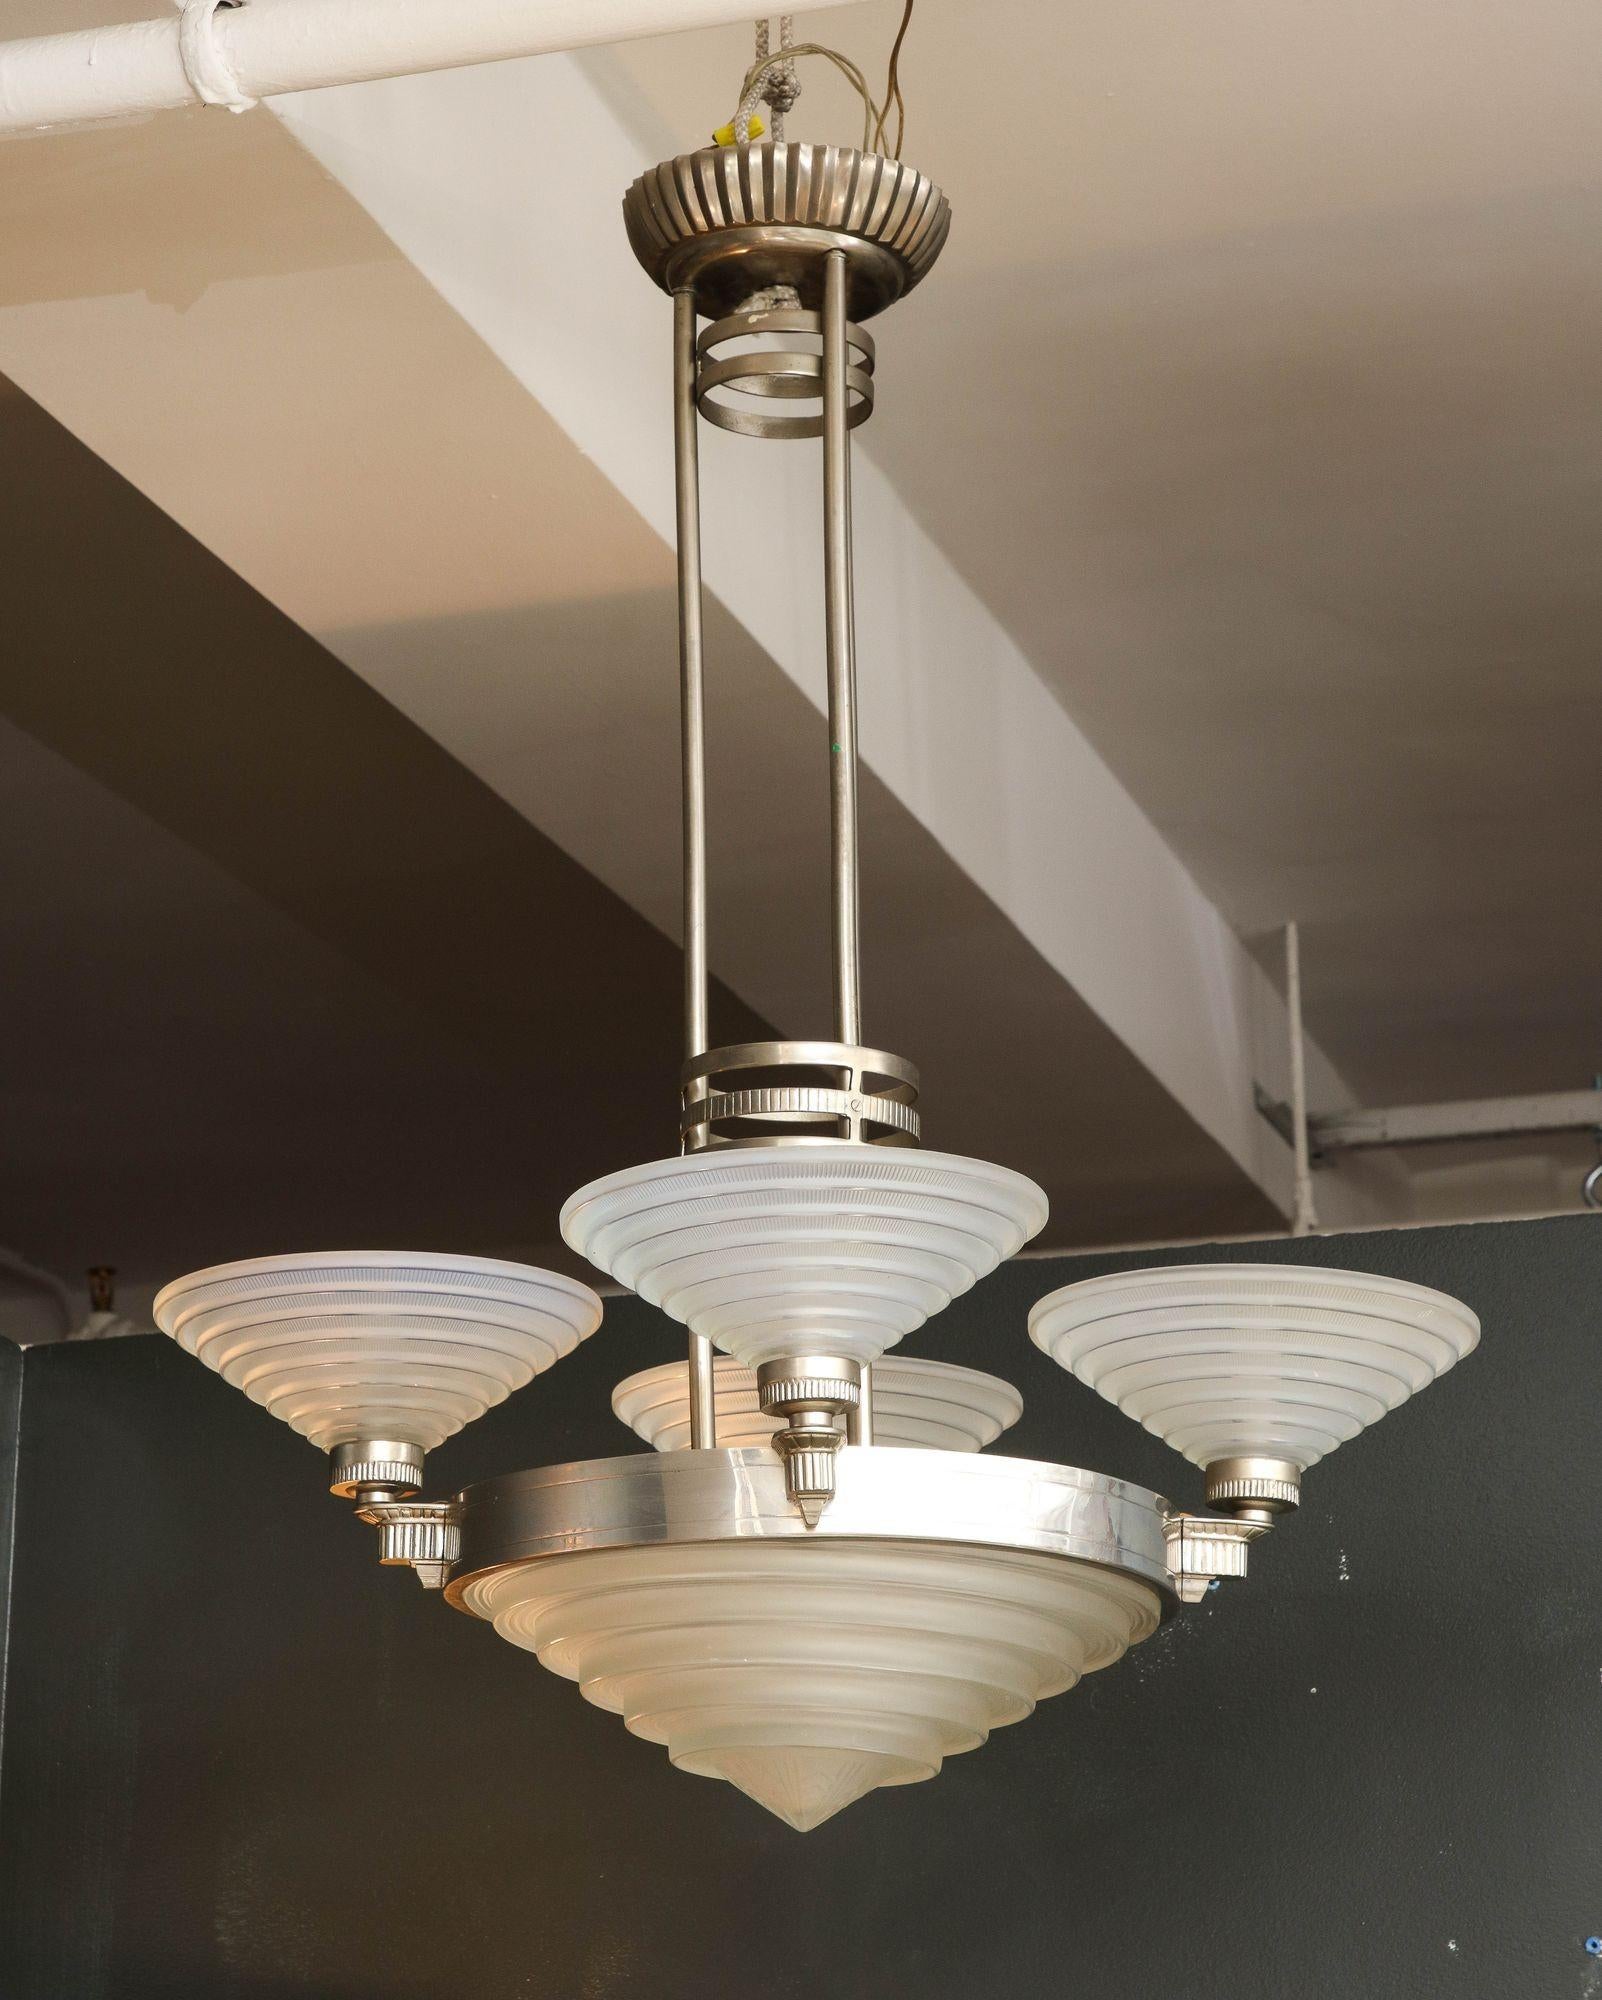 Georges Leleu French Art Deco five-light chandelier, originating from France in the early 20th century. This striking piece showcases a modernist form with a nickel-plated metal frame, highlighting the Art Deco design. The chandelier features a